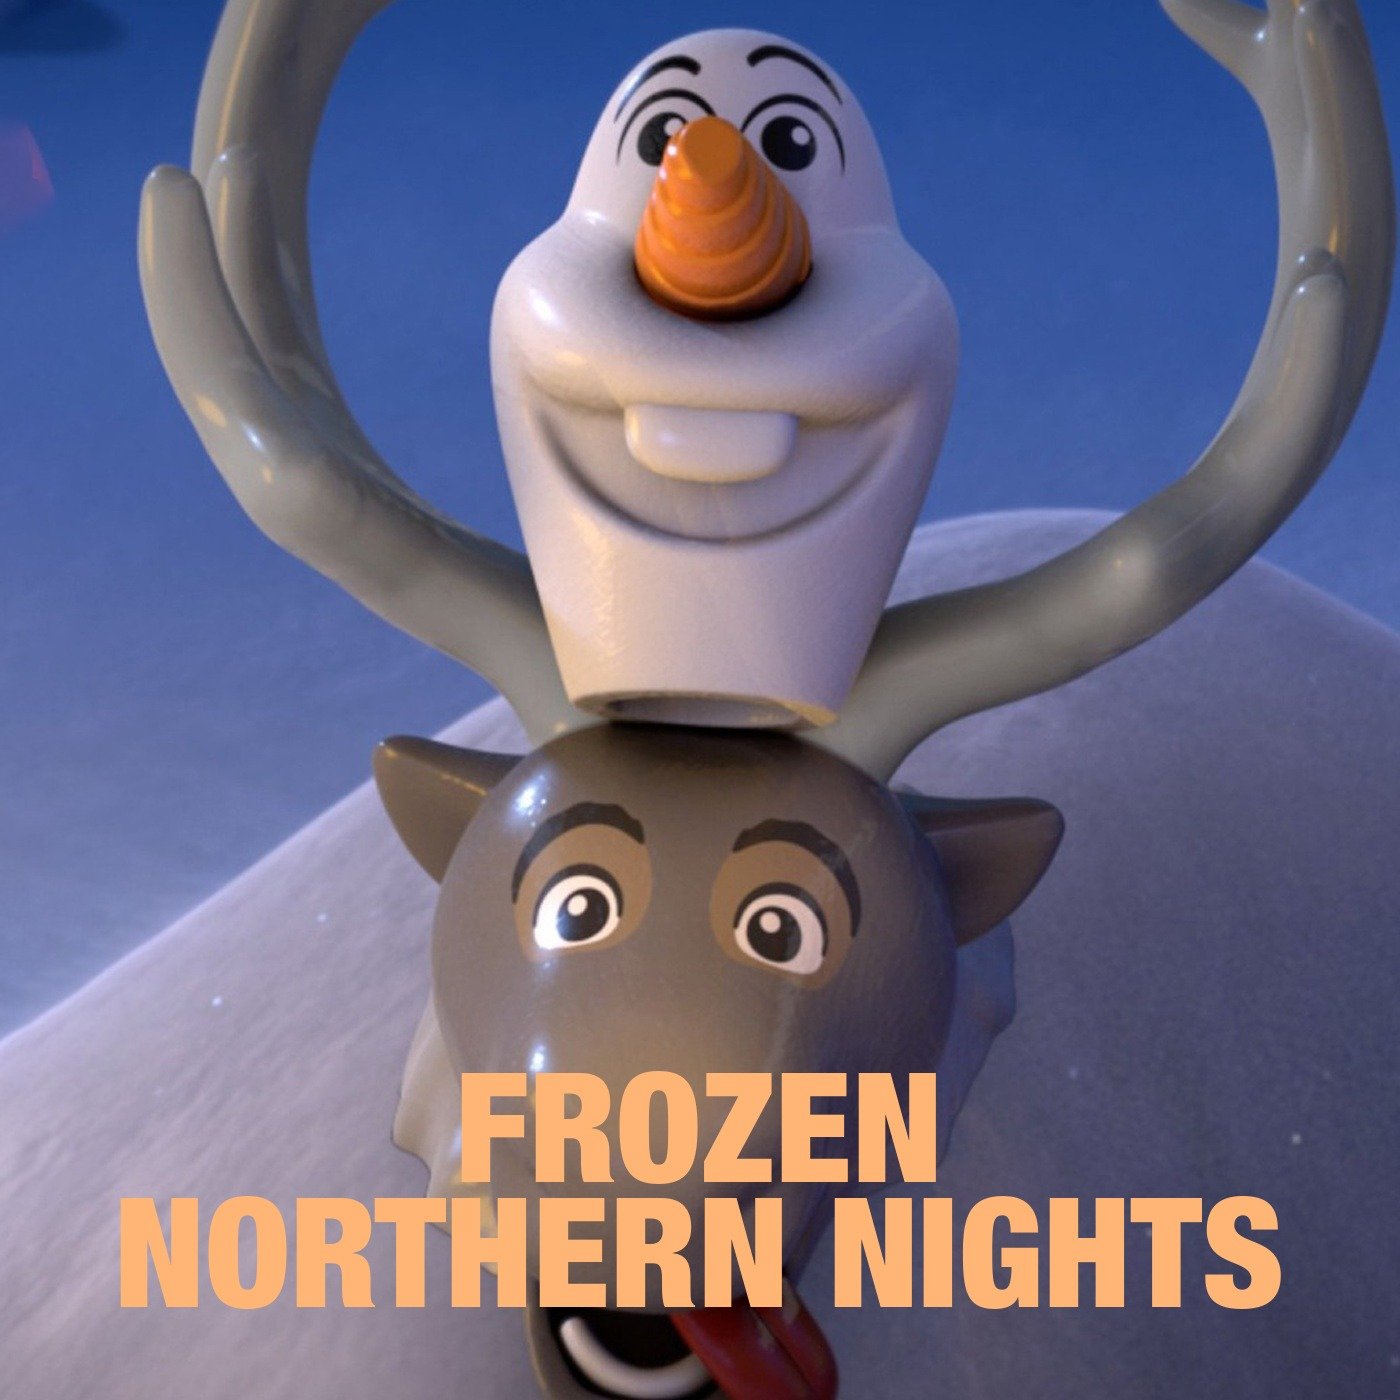 24-facts-about-olaf-lego-frozen-northern-lights